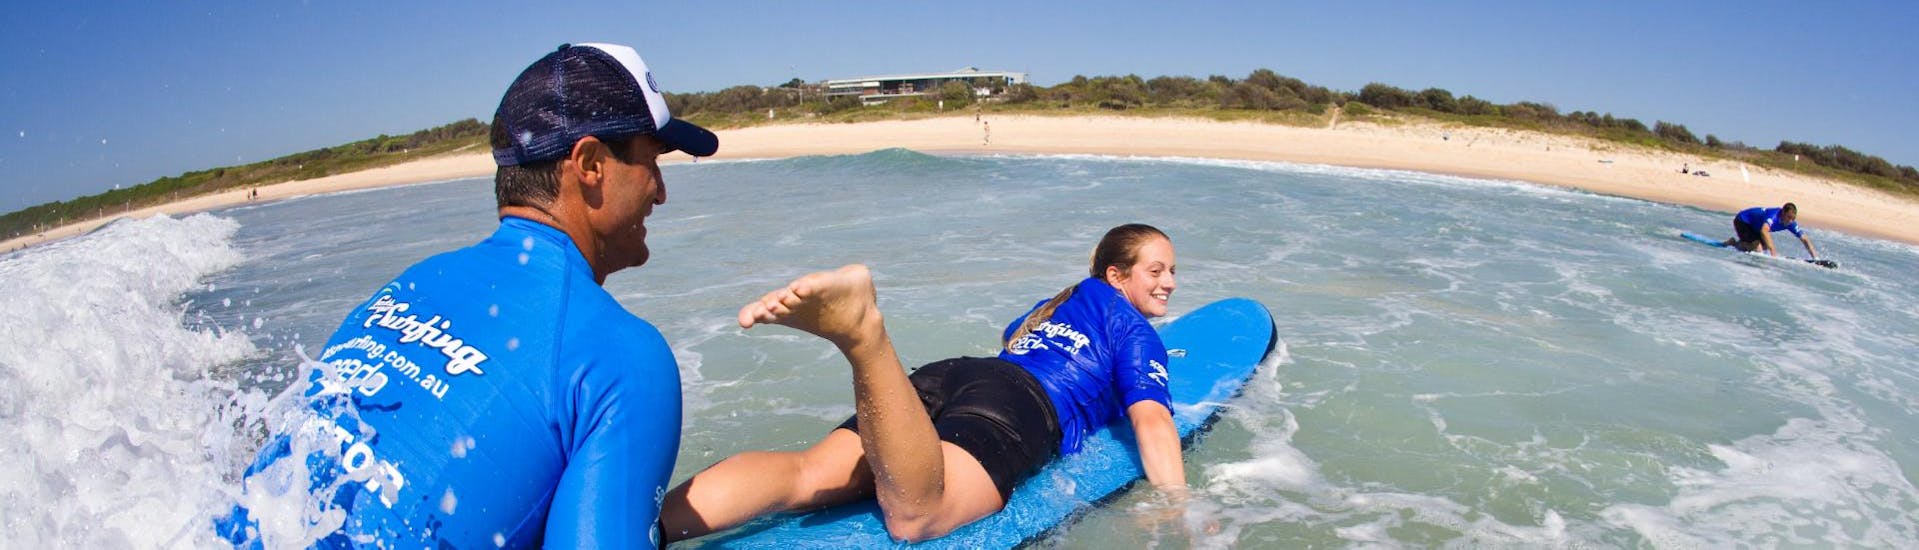 During the Surfing Lessons in Byron Bay for Teens & Adults - Beginner organised by a surf school Let's Go Surfing, a woman is learning how to surf.